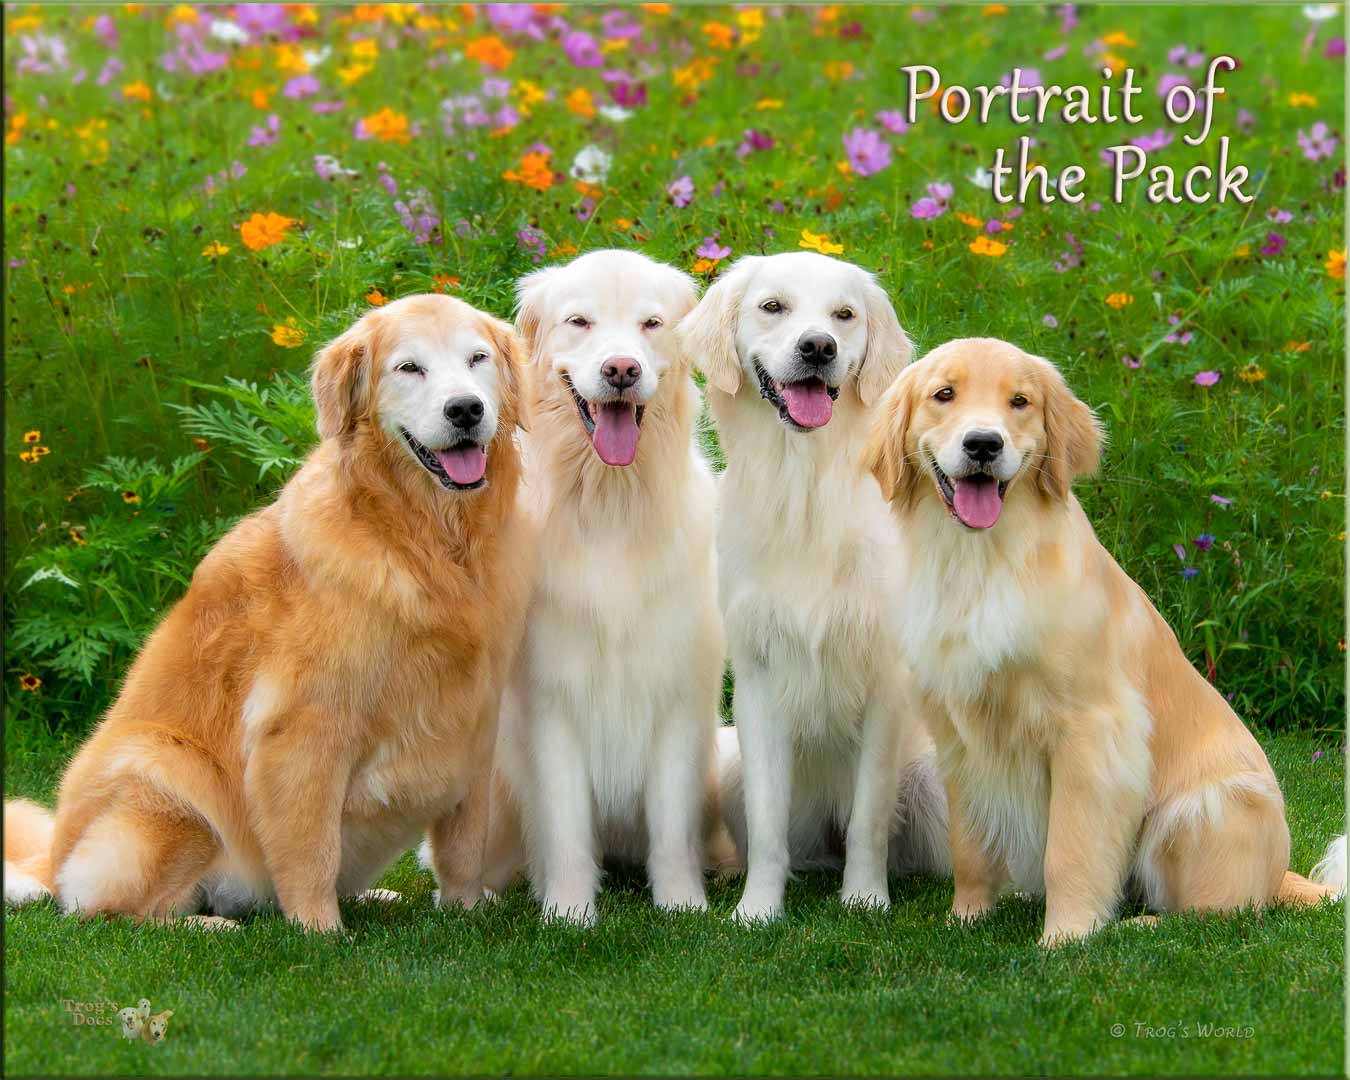 Four Golden Retrievers pose for a picture